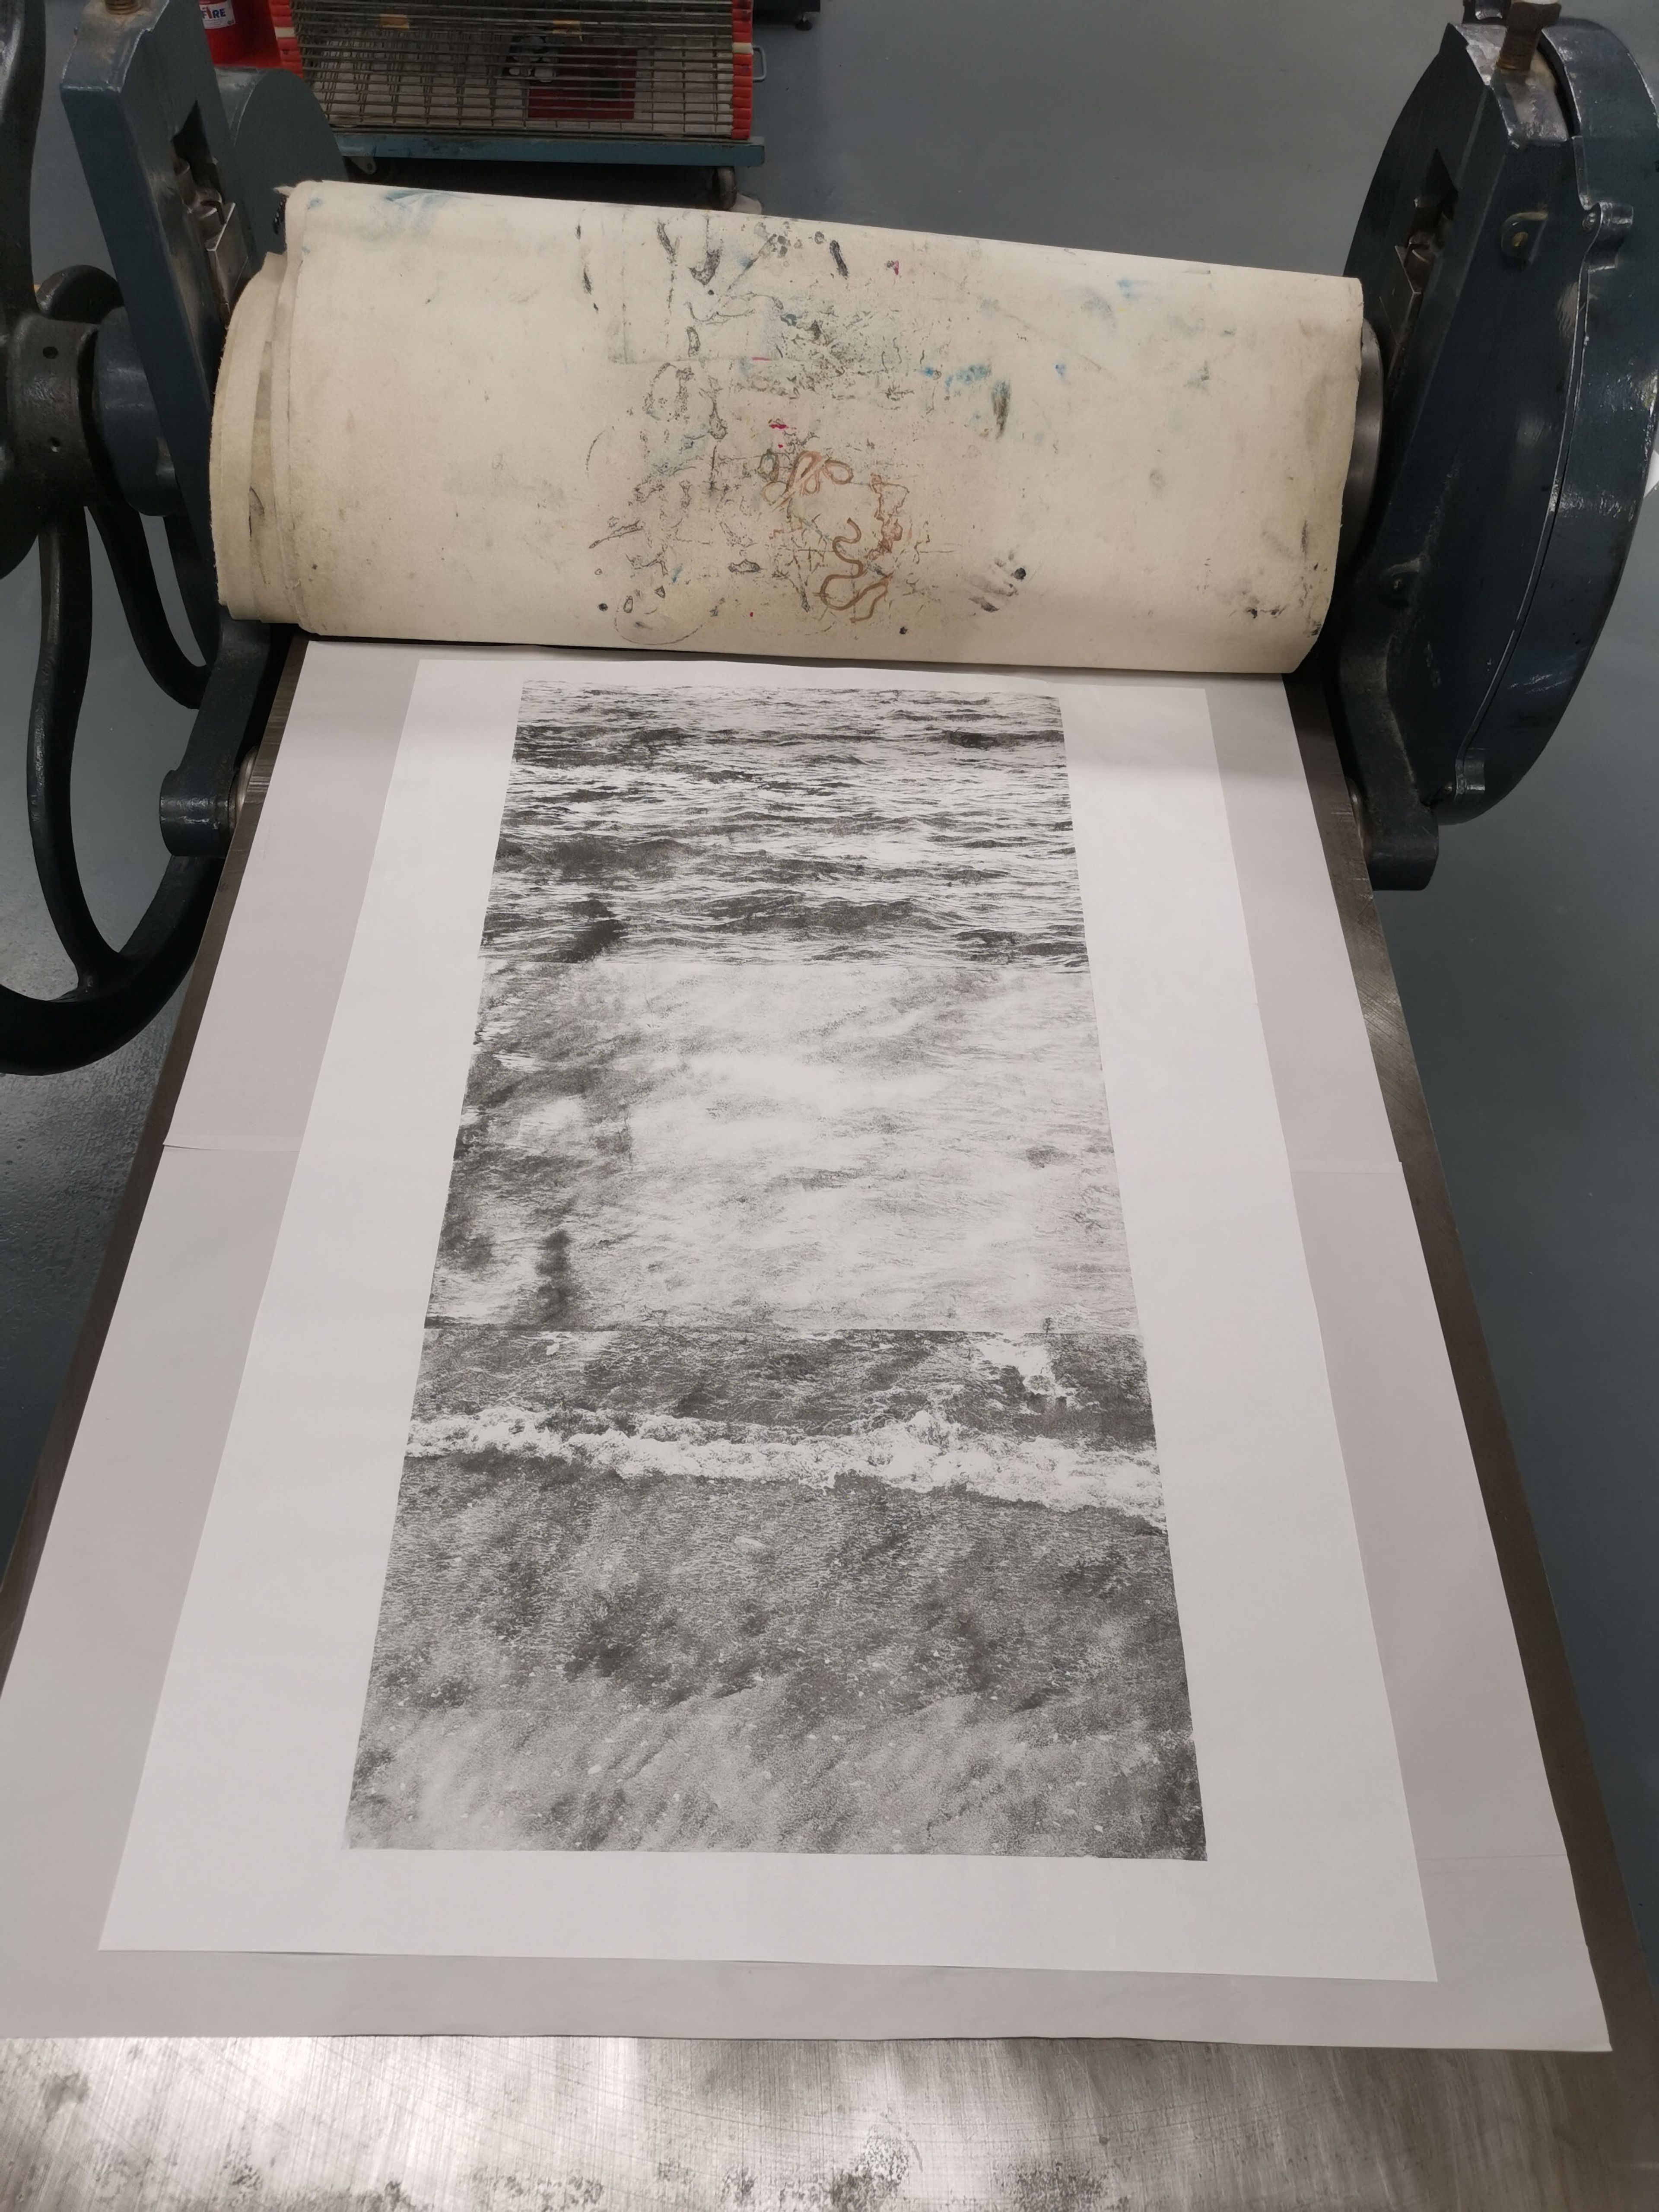 photo of paper lithography print on rochat press